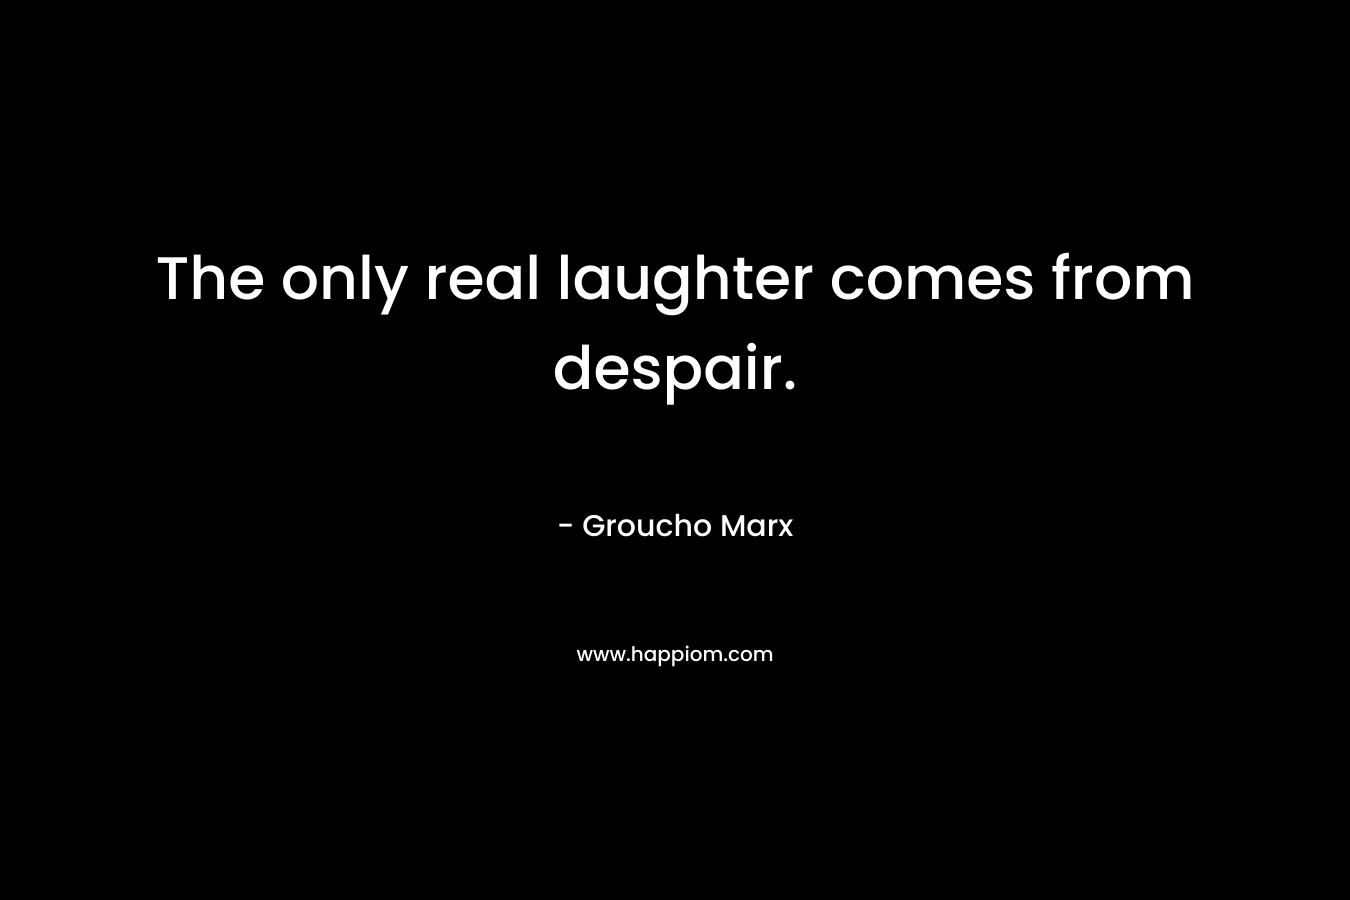 The only real laughter comes from despair. – Groucho Marx